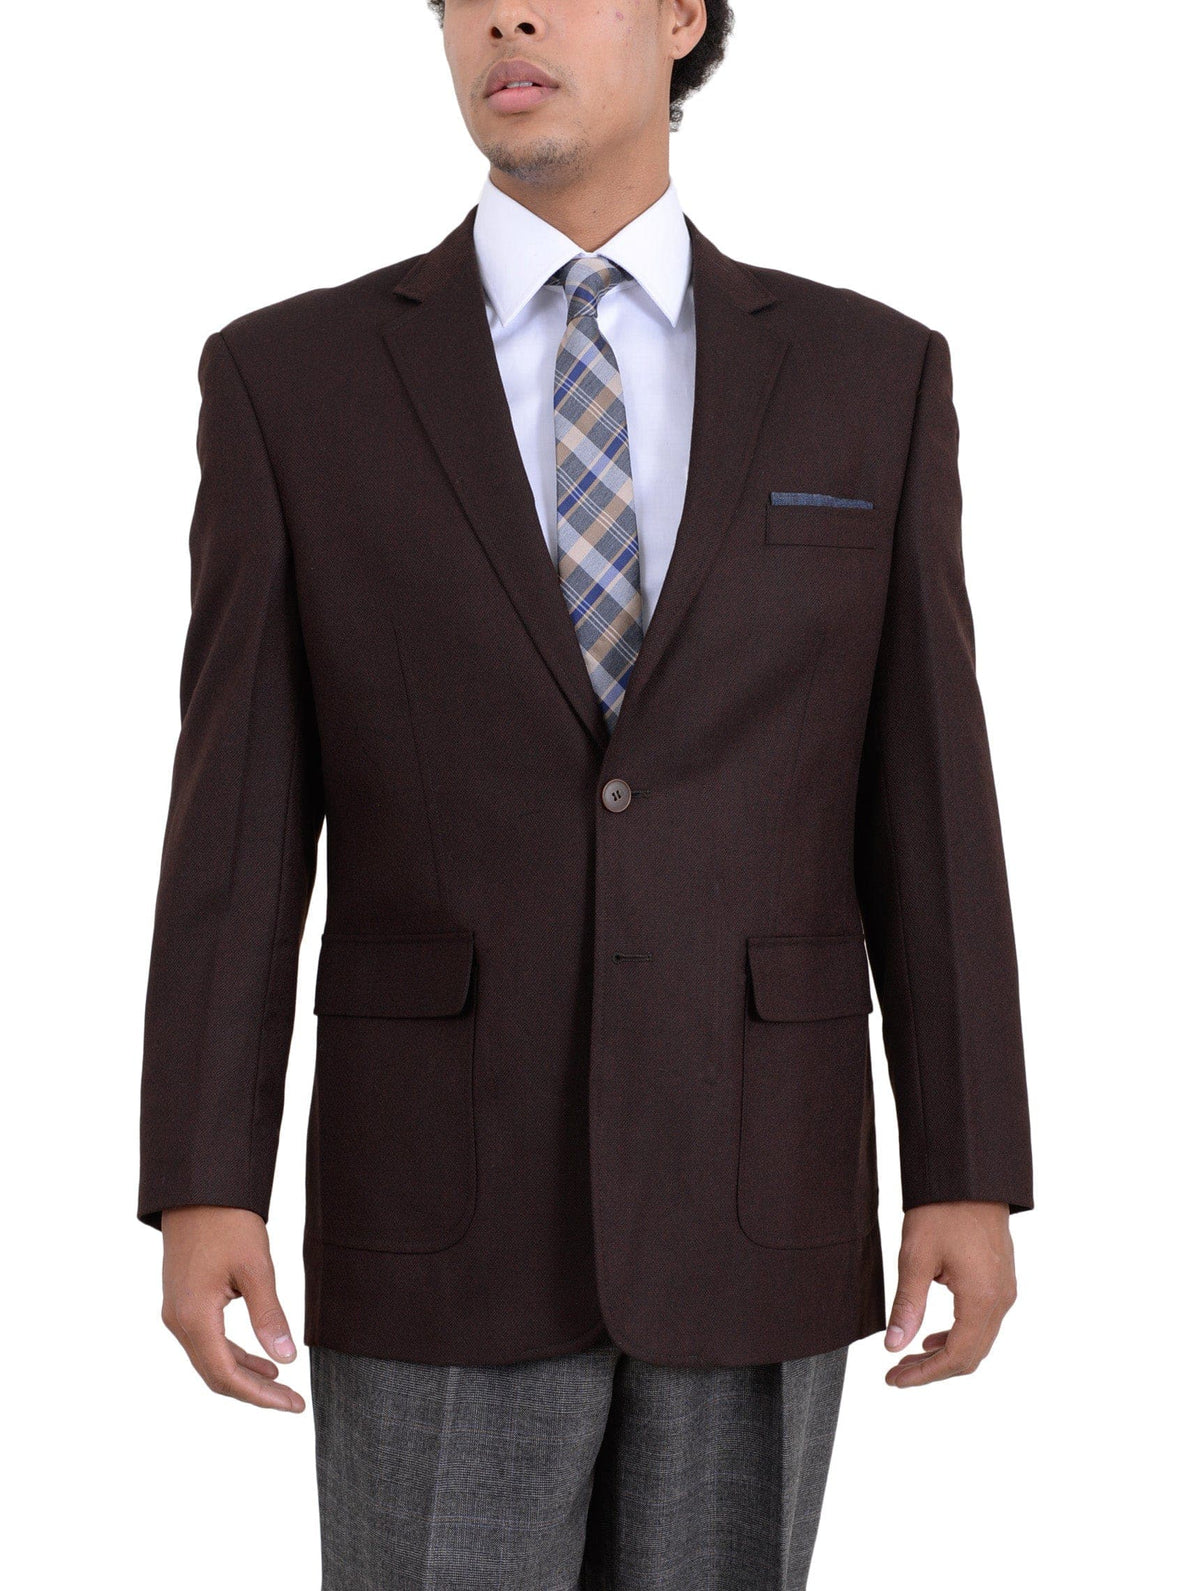 Apollo King BLAZERS Apollo King Brown Textured Wool Blazer Sportcoat With Removable Mock Liner